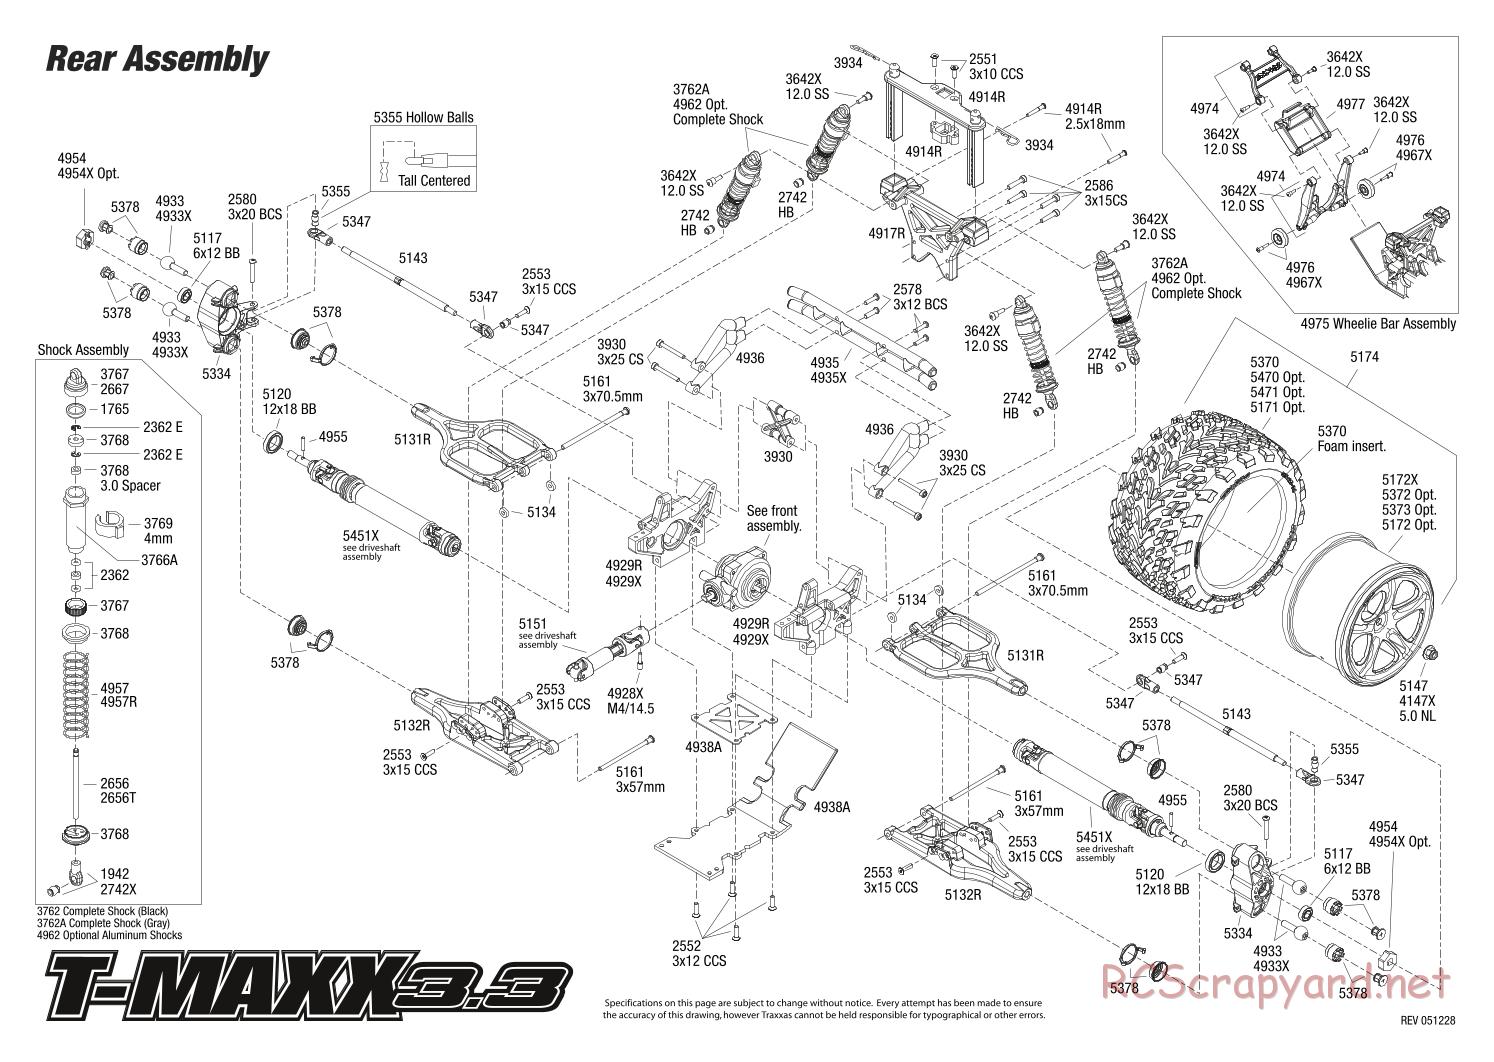 Traxxas - T-Maxx 3.3 (2006) - Exploded Views - Page 4